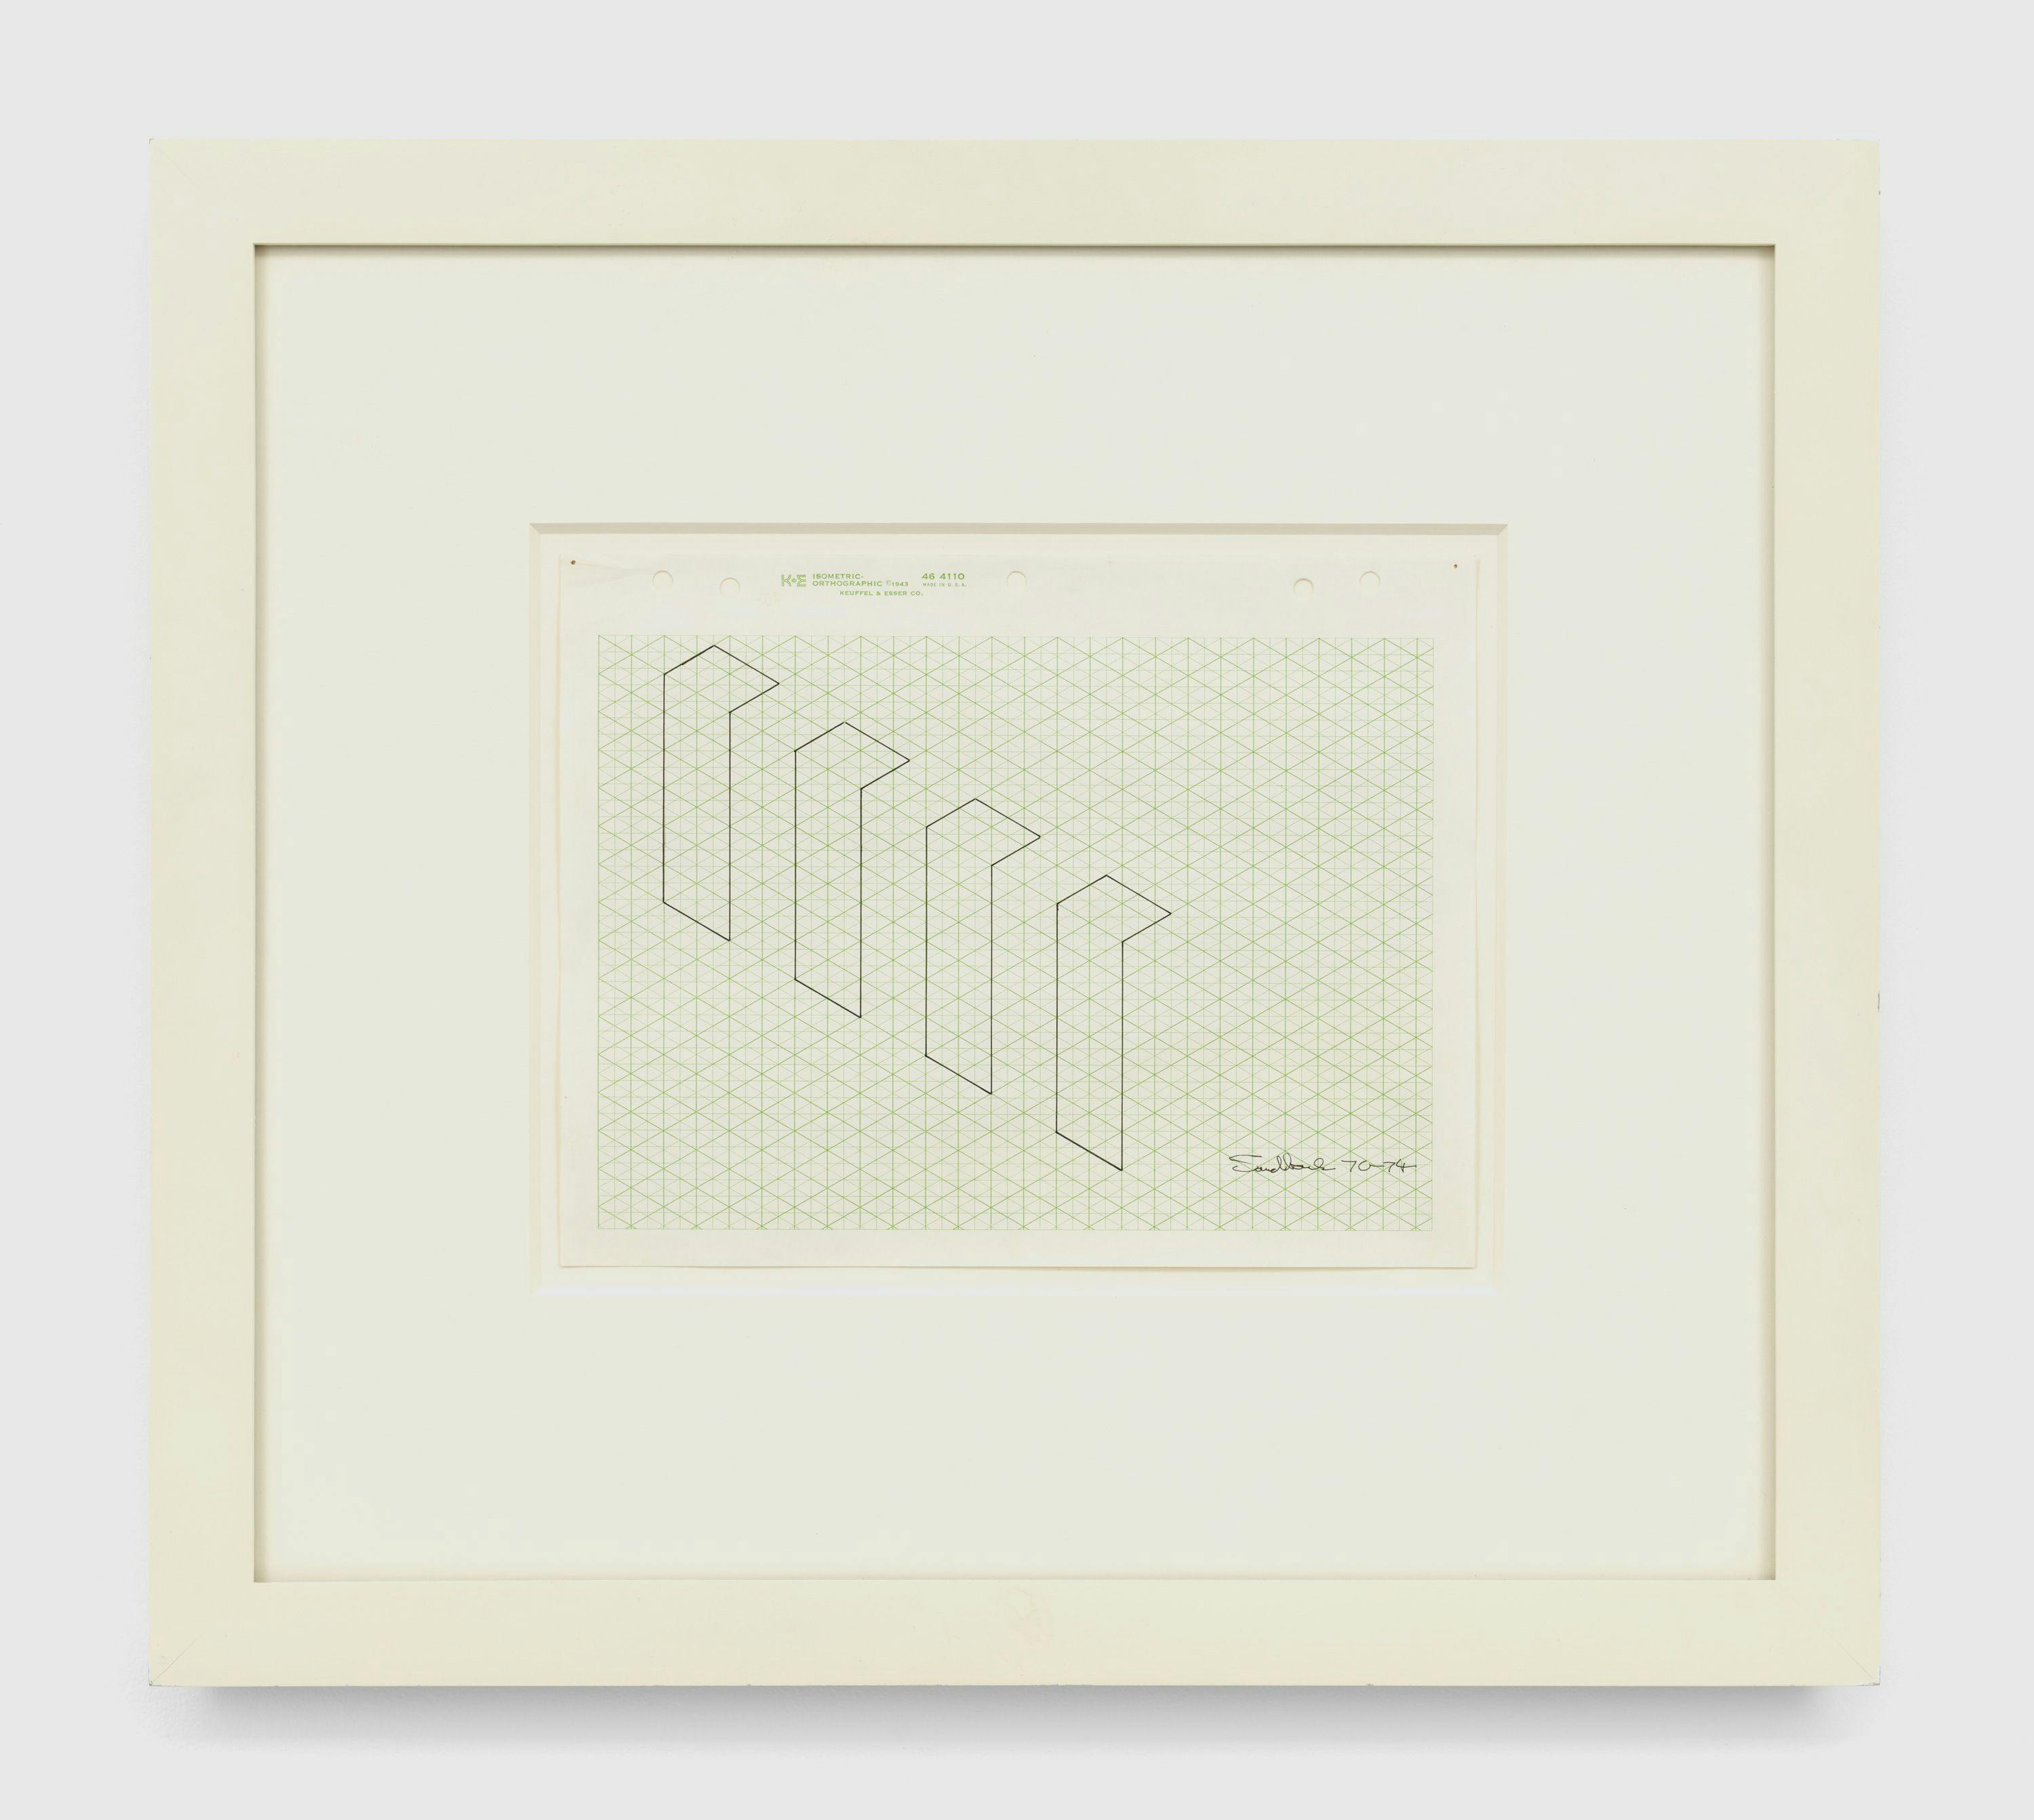 An untitled drawing by Fred Sandback, dated from 1970 to 1974.